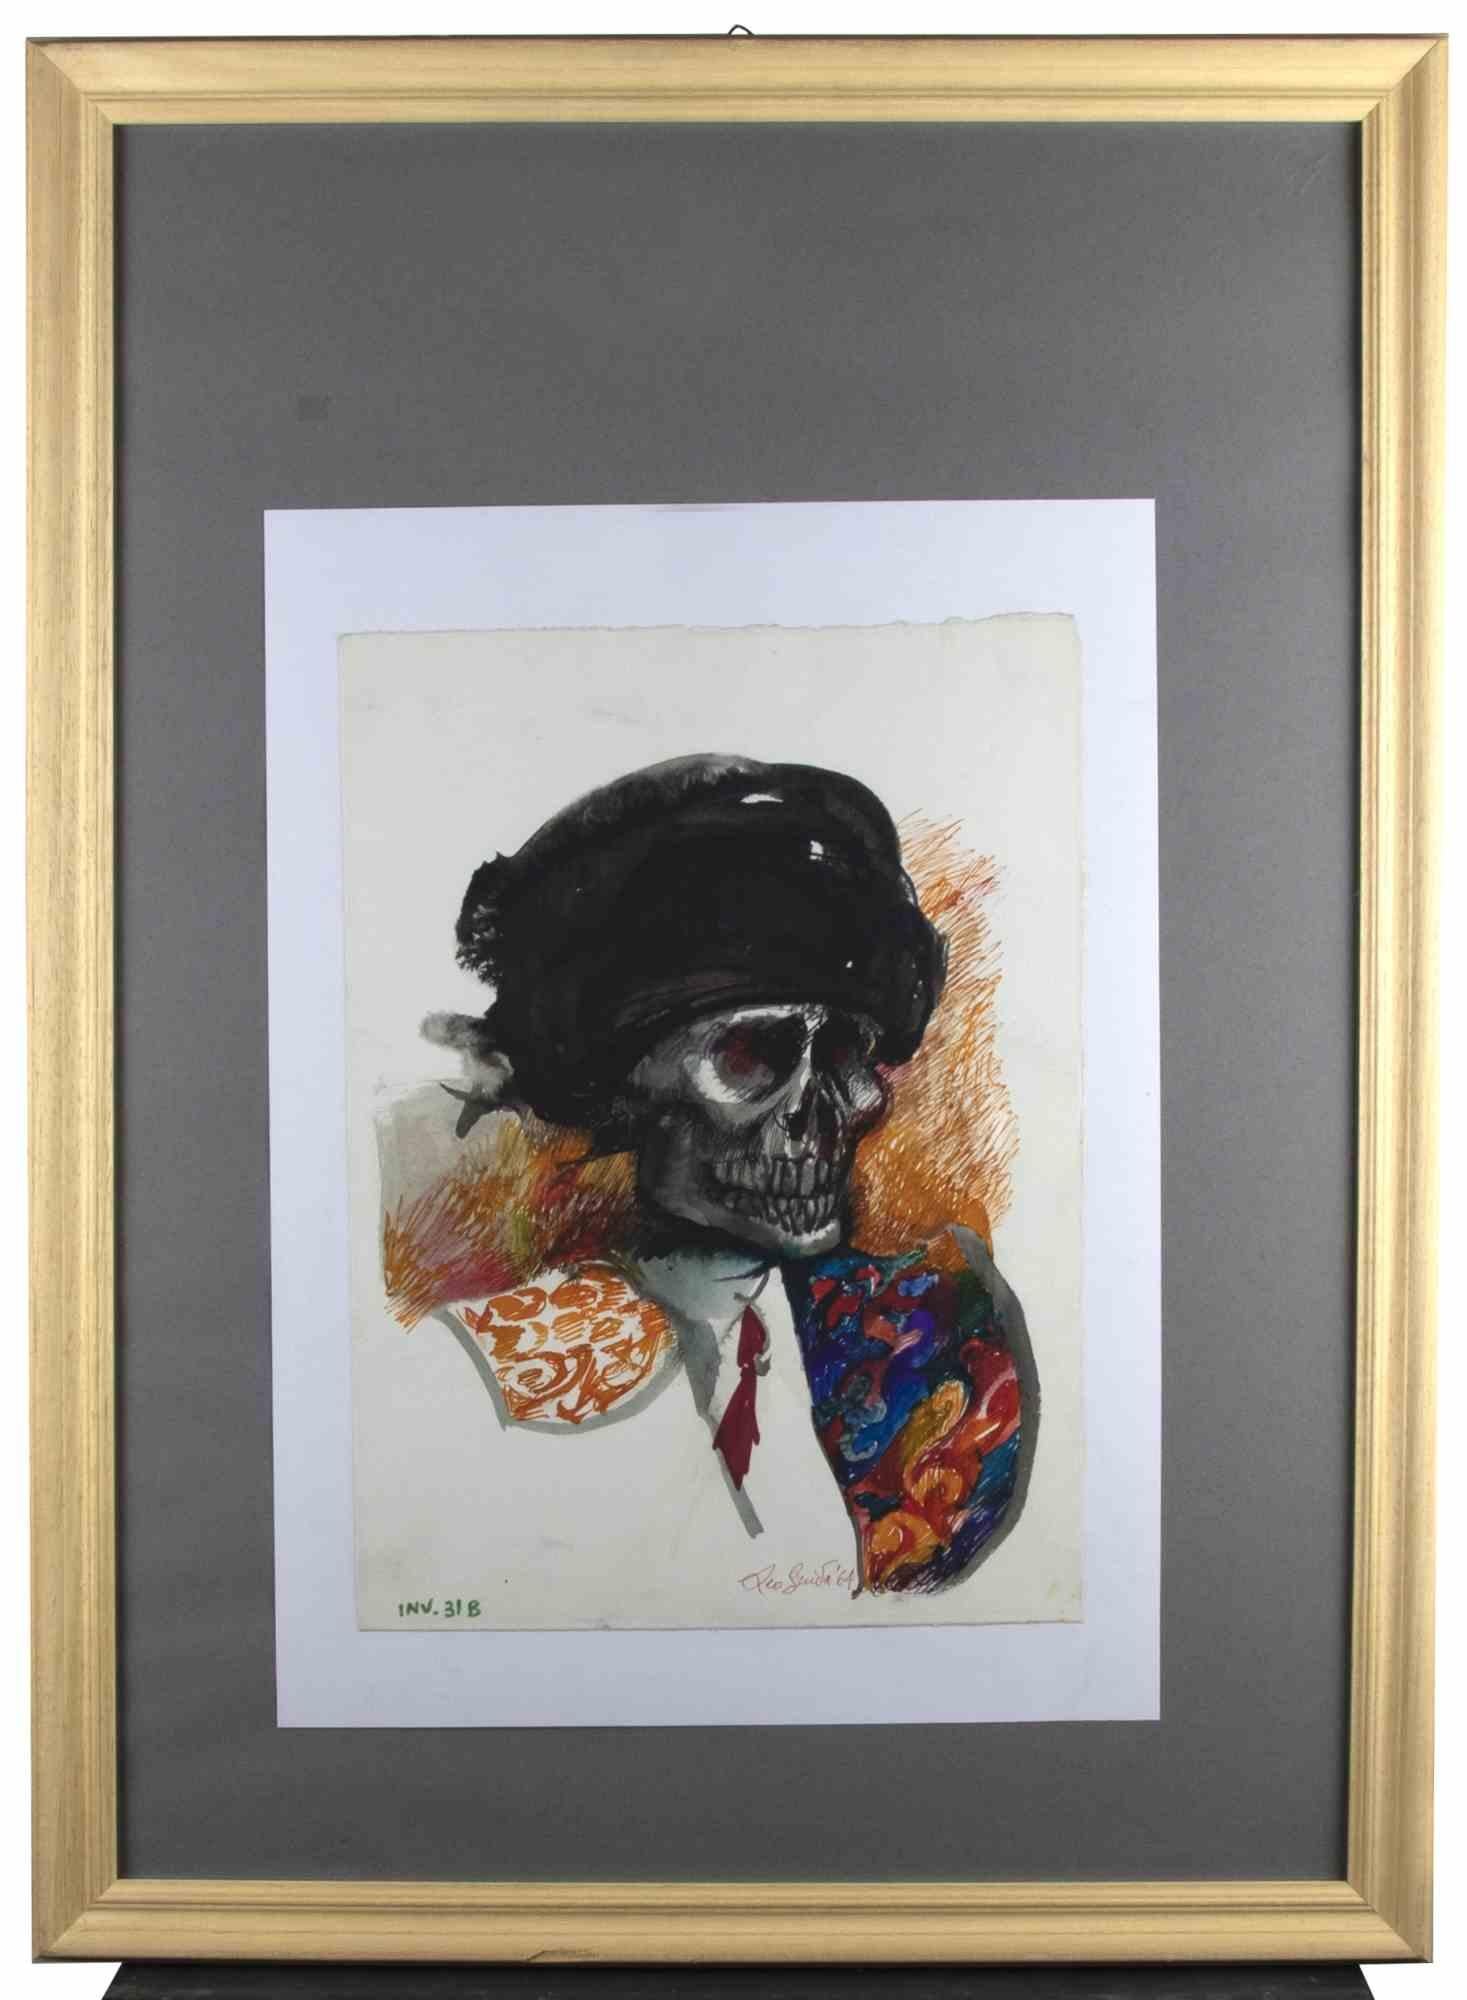 Matador 7  is an original contemporary artwork realized in  1964  by the italian artist  Leo Guida  (1992 - 2017).

Original Colored Ink and ecoline on paper.

Wood frame is included.

Sheet Dimensions: cm 48 x 0.1 x 34.

Mint conditions.

Torero 